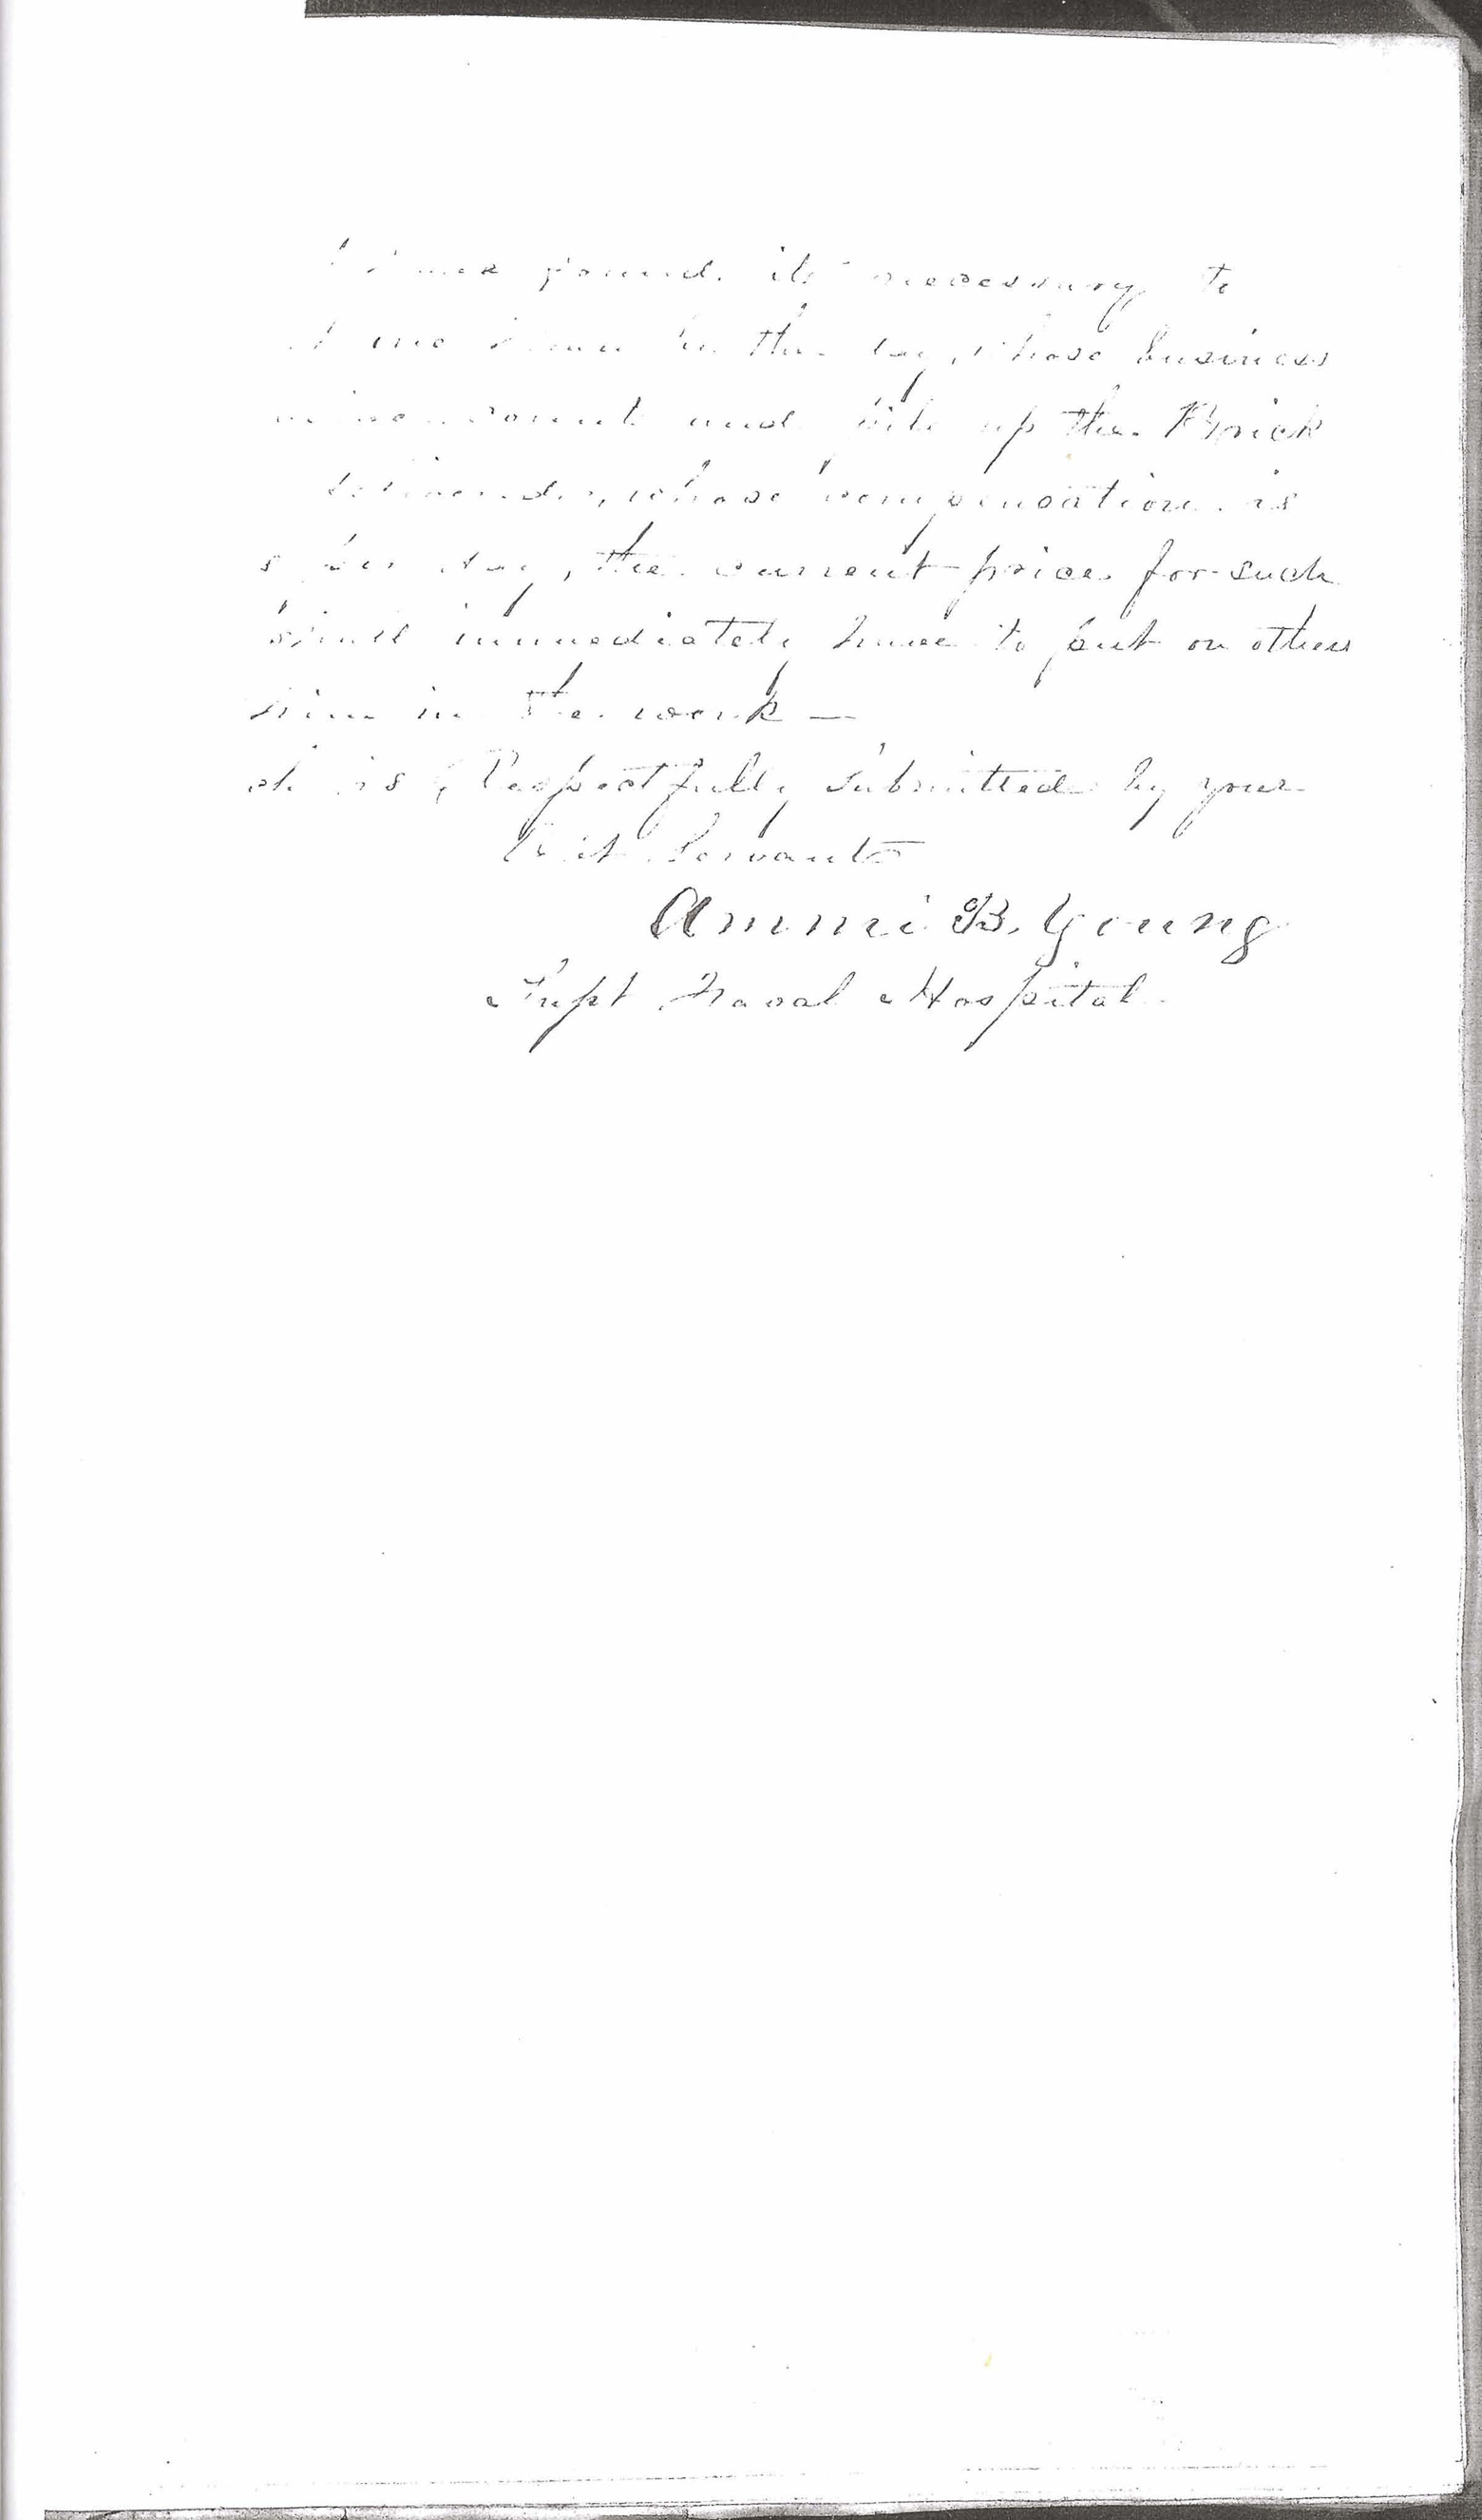 Monthly Report of the Superintendent of Construction, November 1, 1864, Page 3 of 3